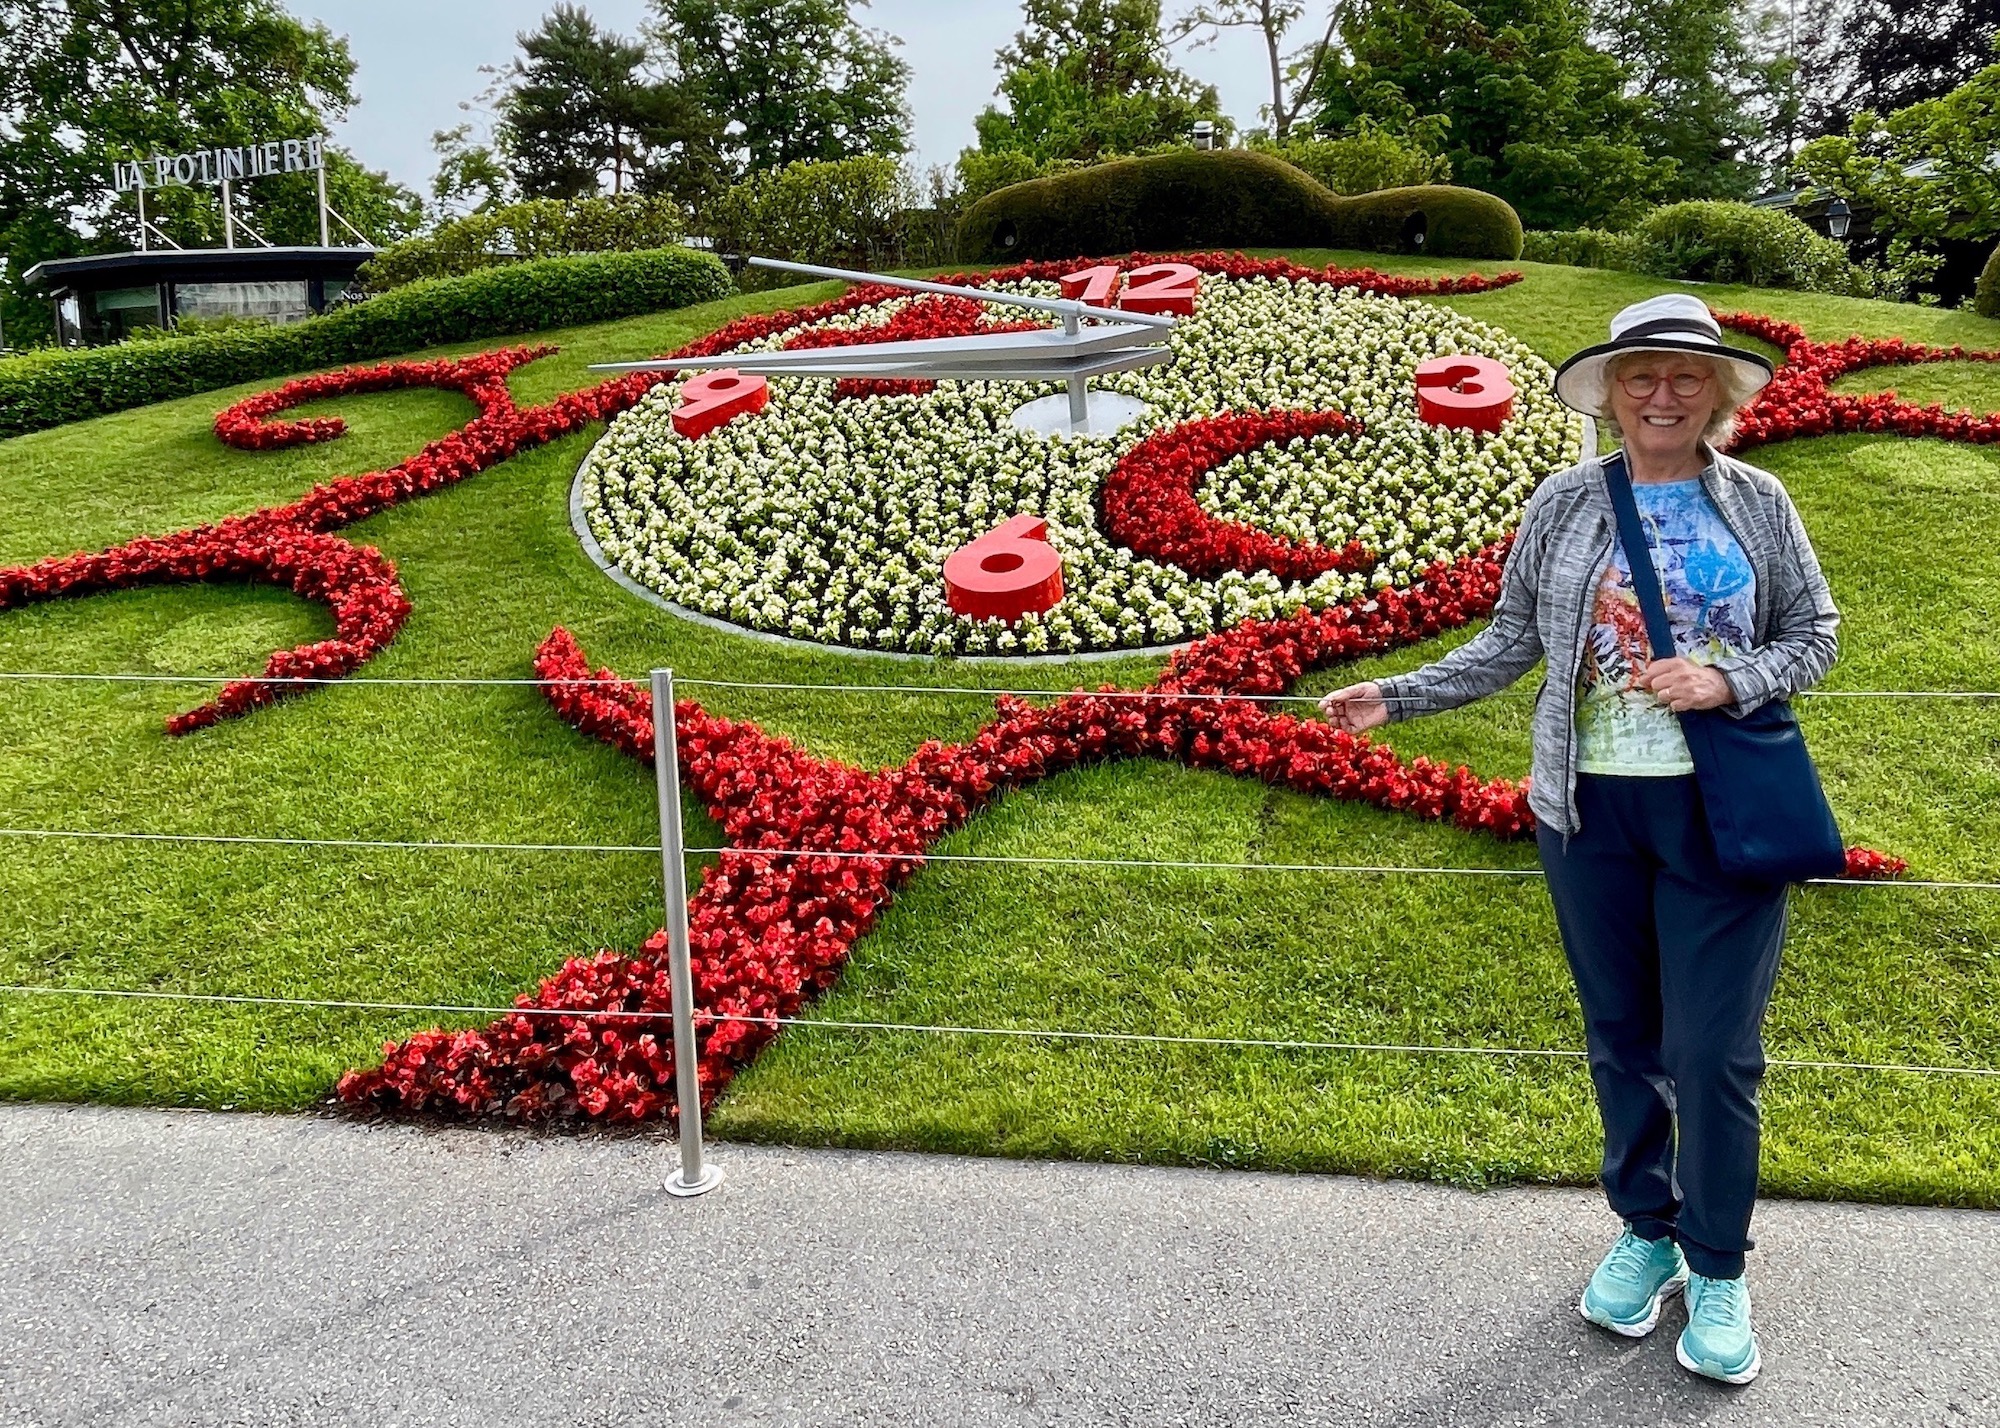 Alison at the Flower Clock, Old Town Geneva